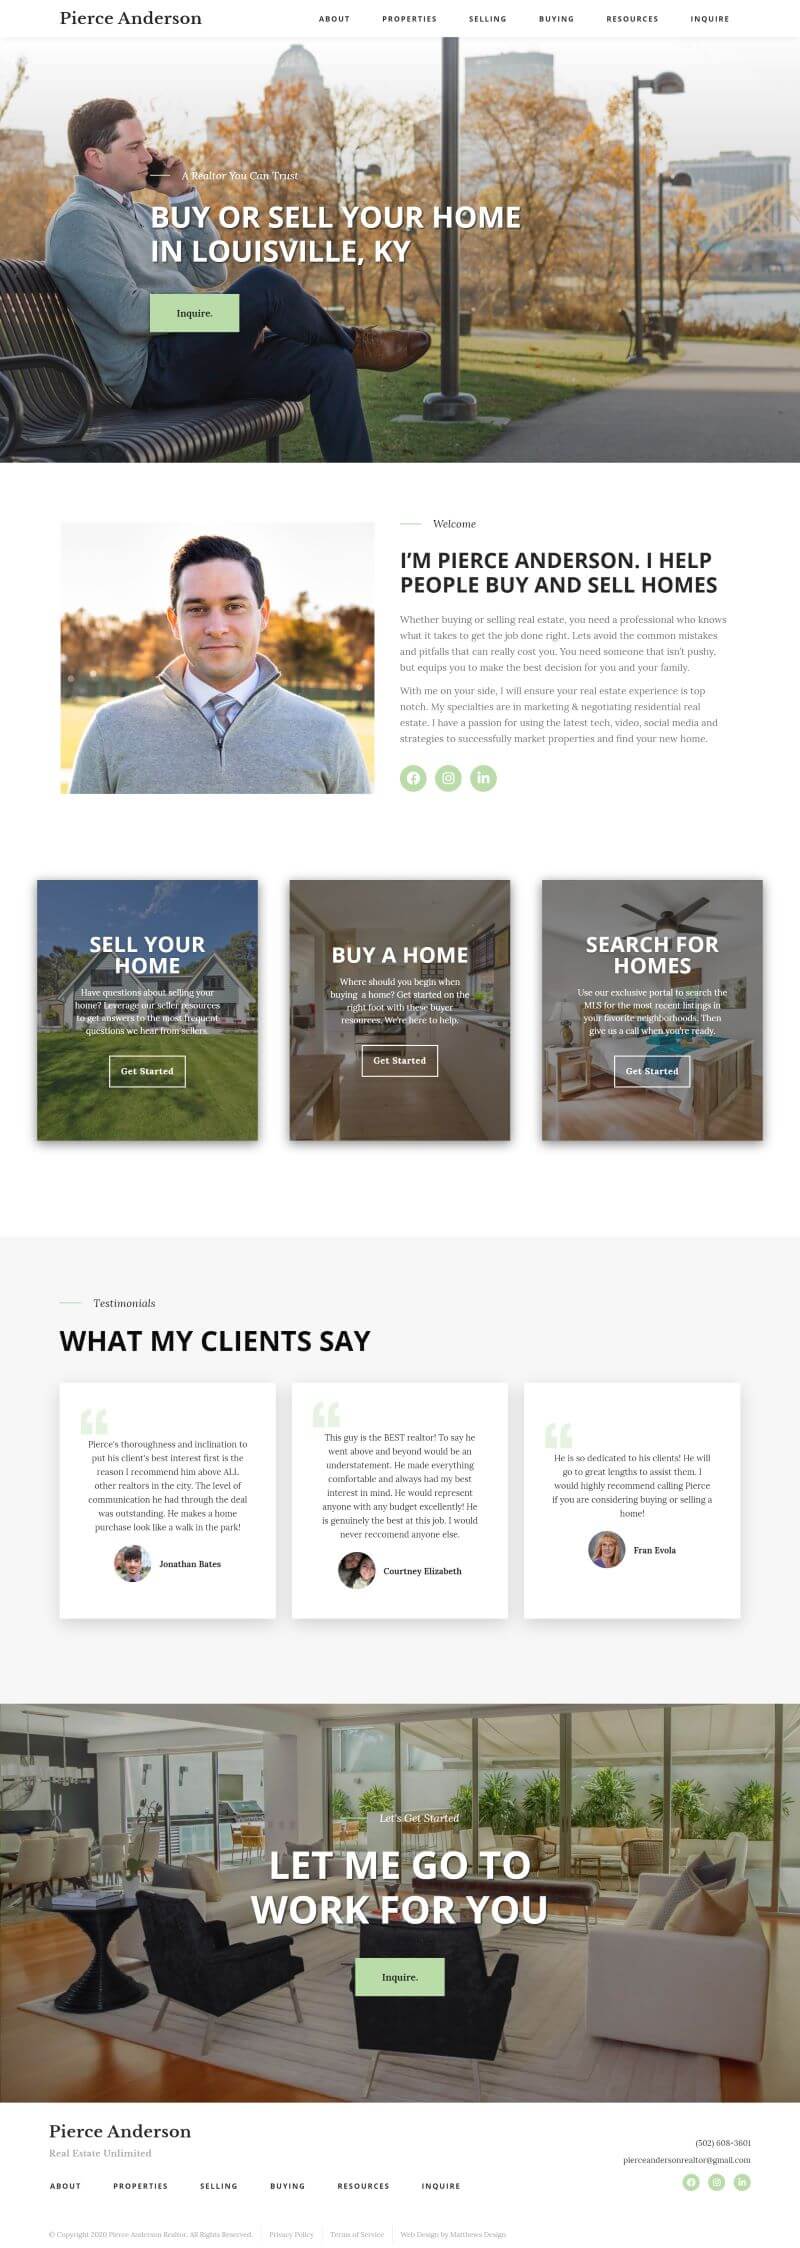 Realtor Website Design and Marketing – Just another WordPress site